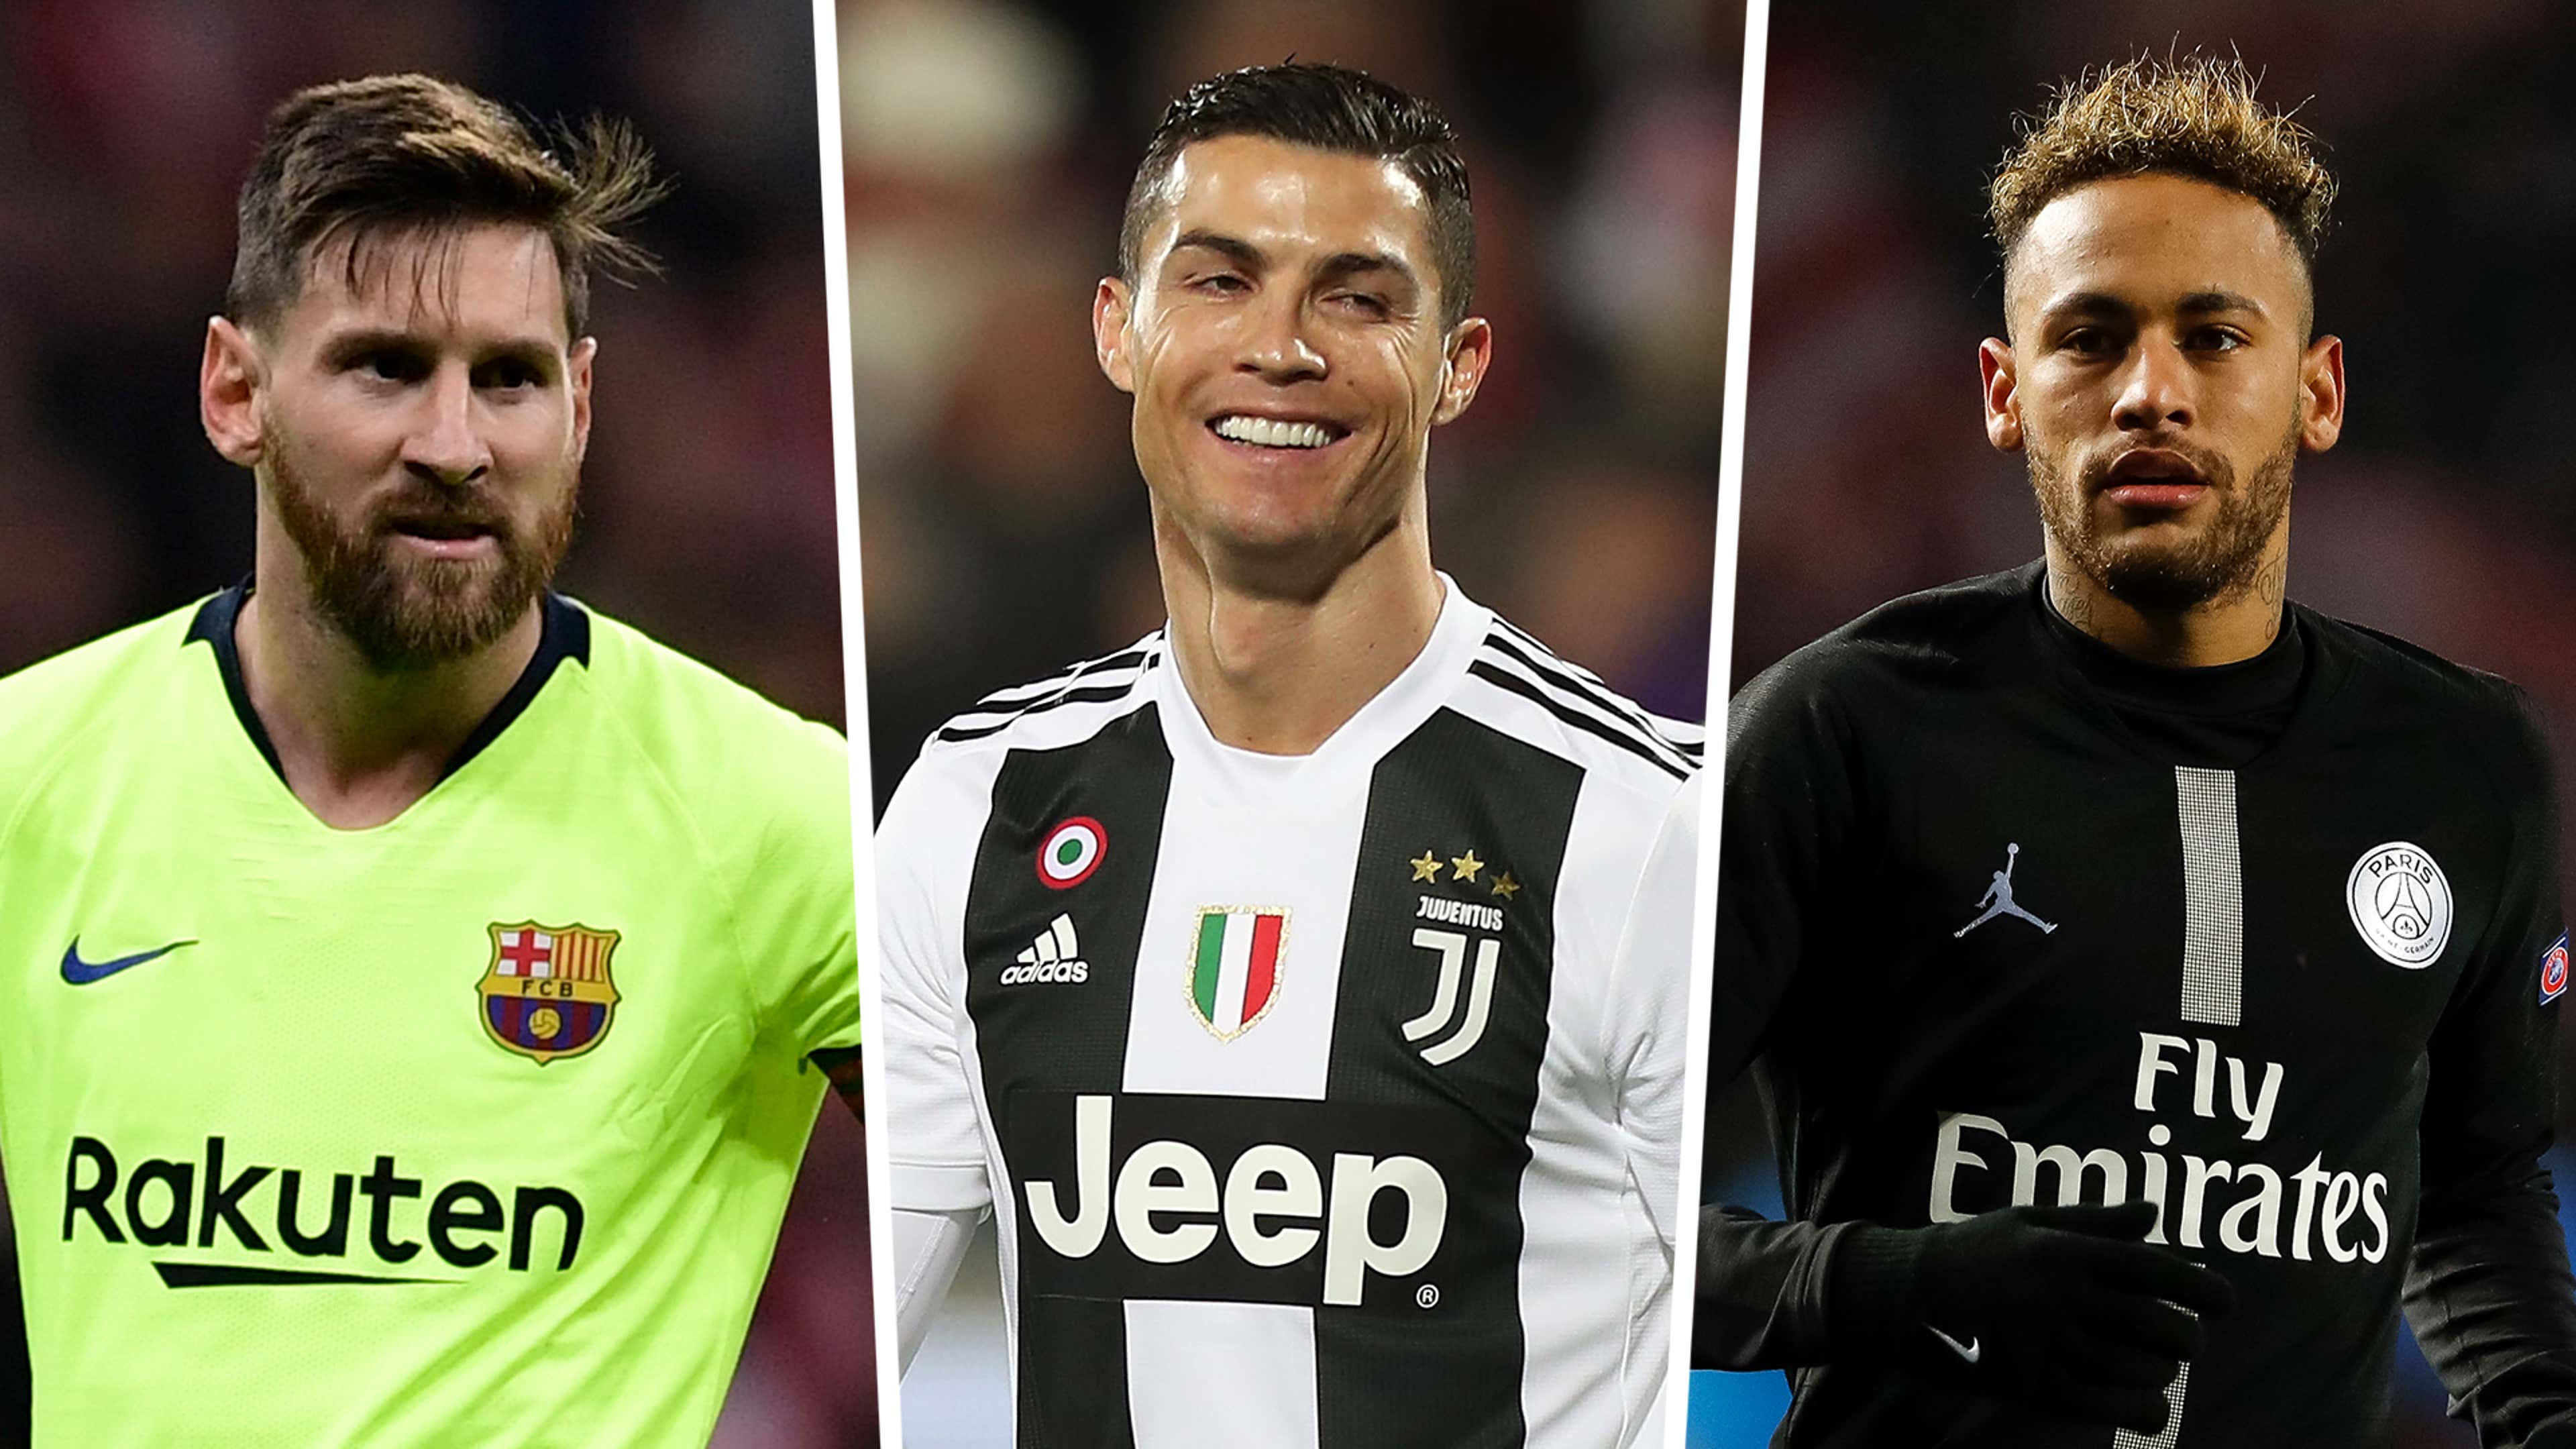 3 players who have played with Ronaldo, Messi and Neymar